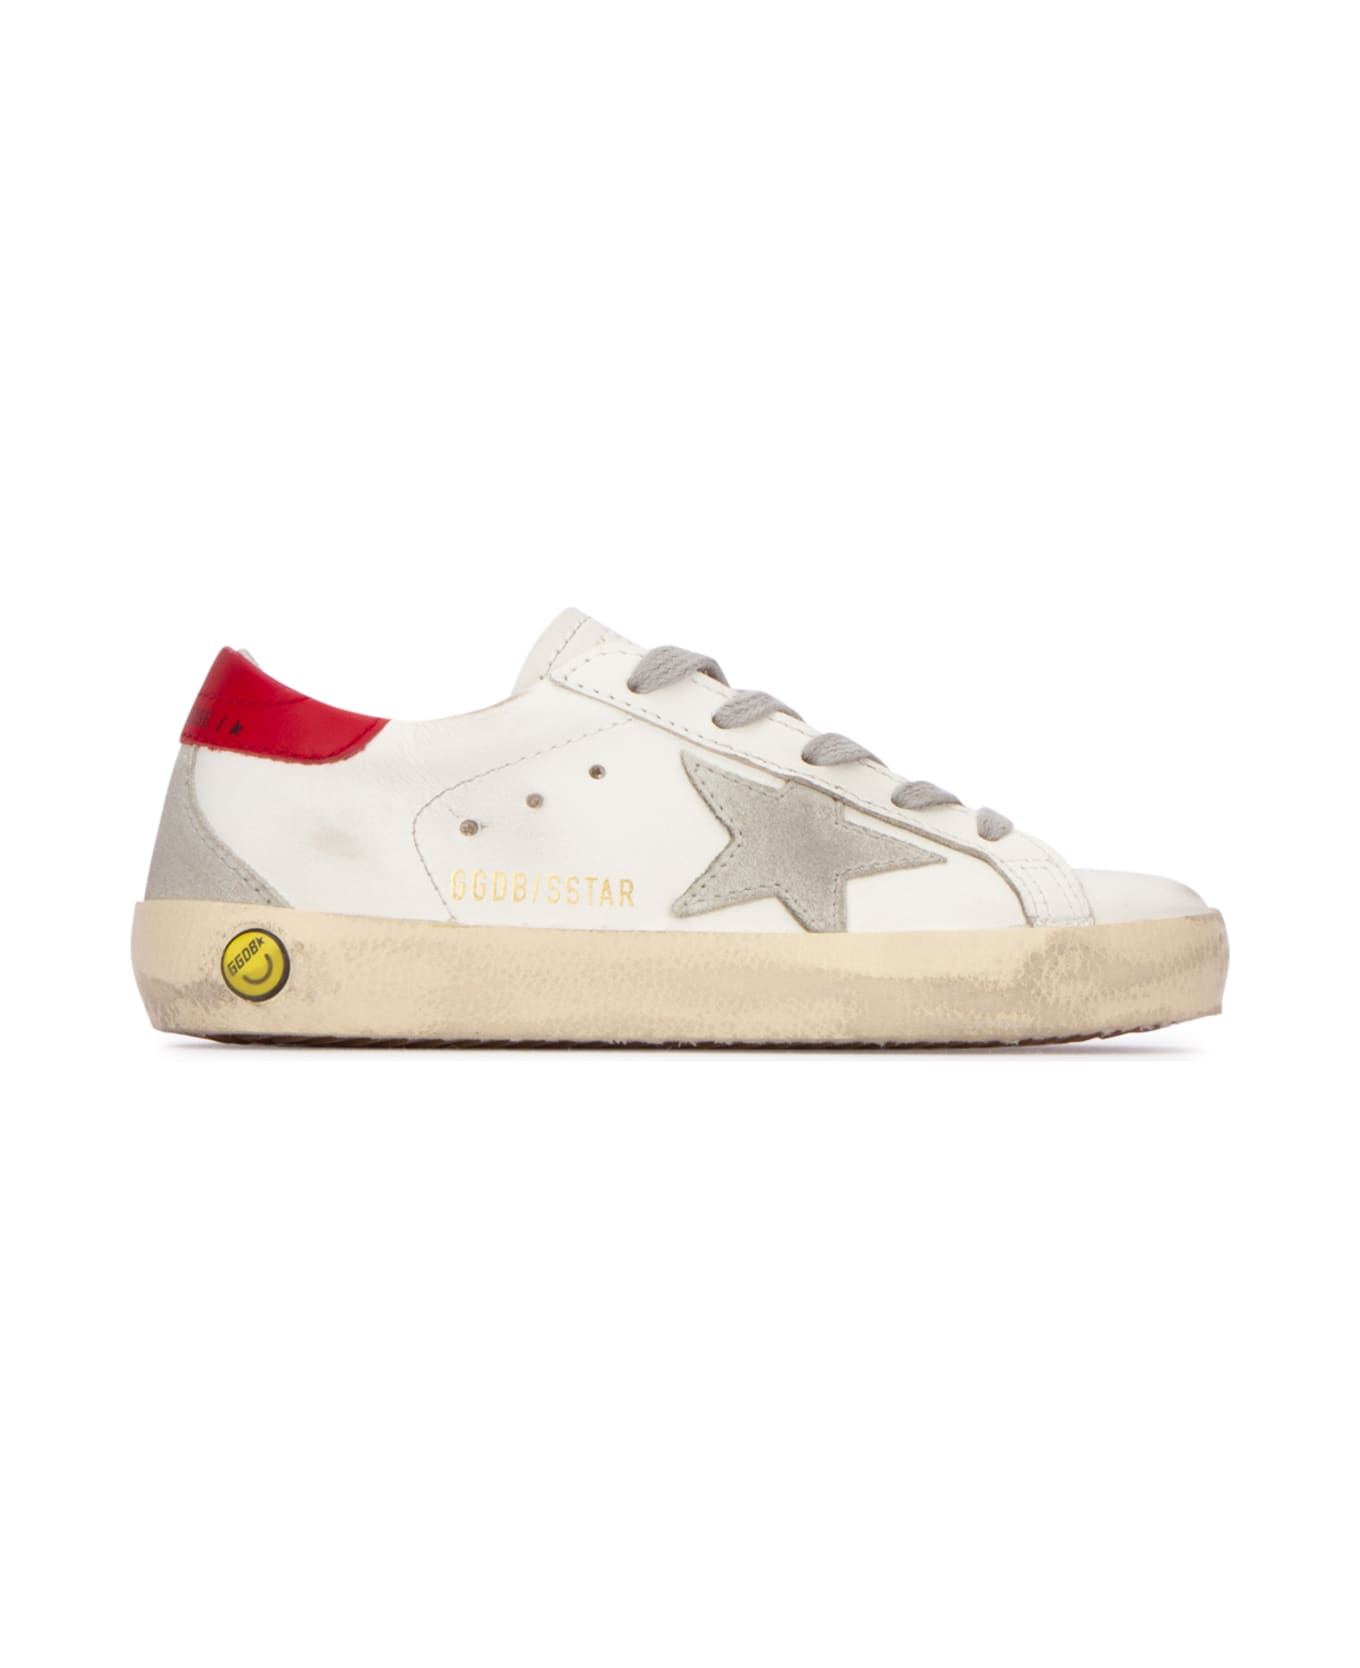 Golden Goose Sneakers - WHITEICERED シューズ